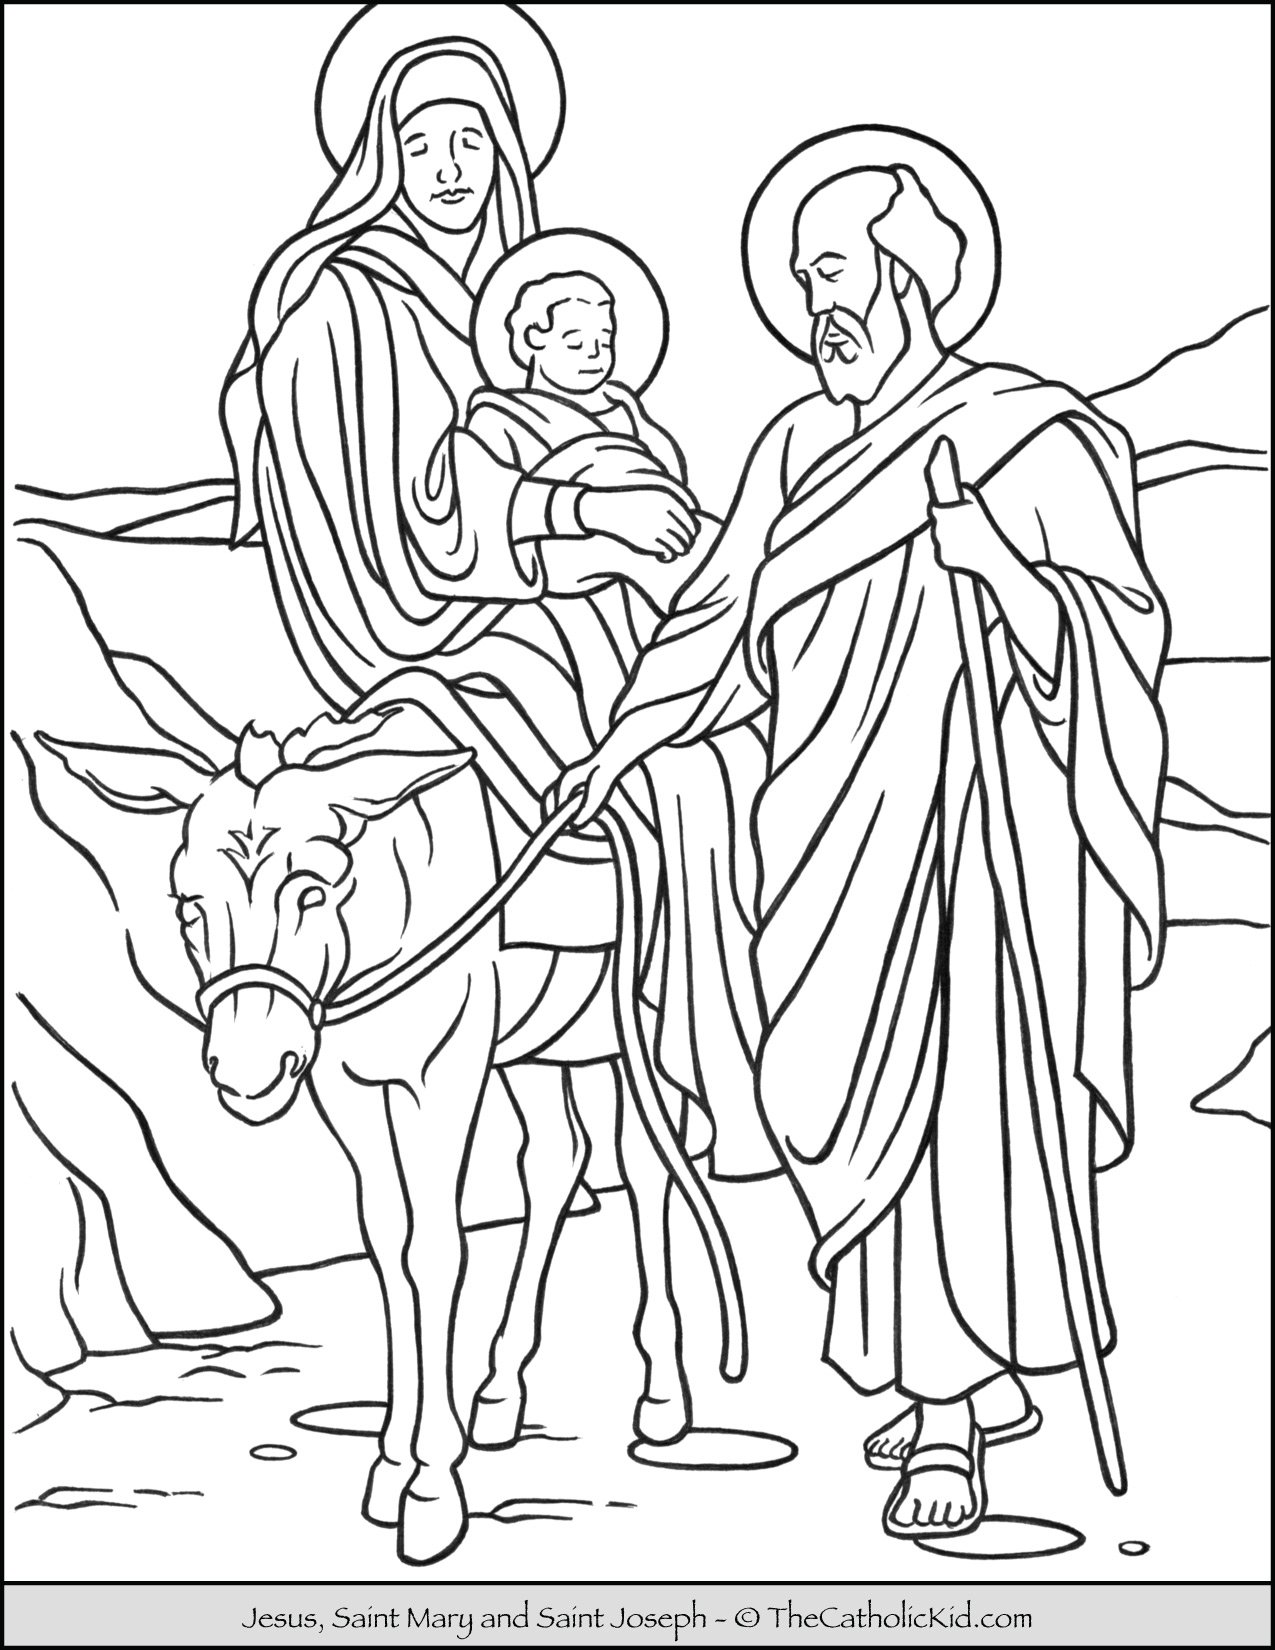 Donkey Archives - The Catholic Kid - Catholic Coloring Pages and Games for  Children